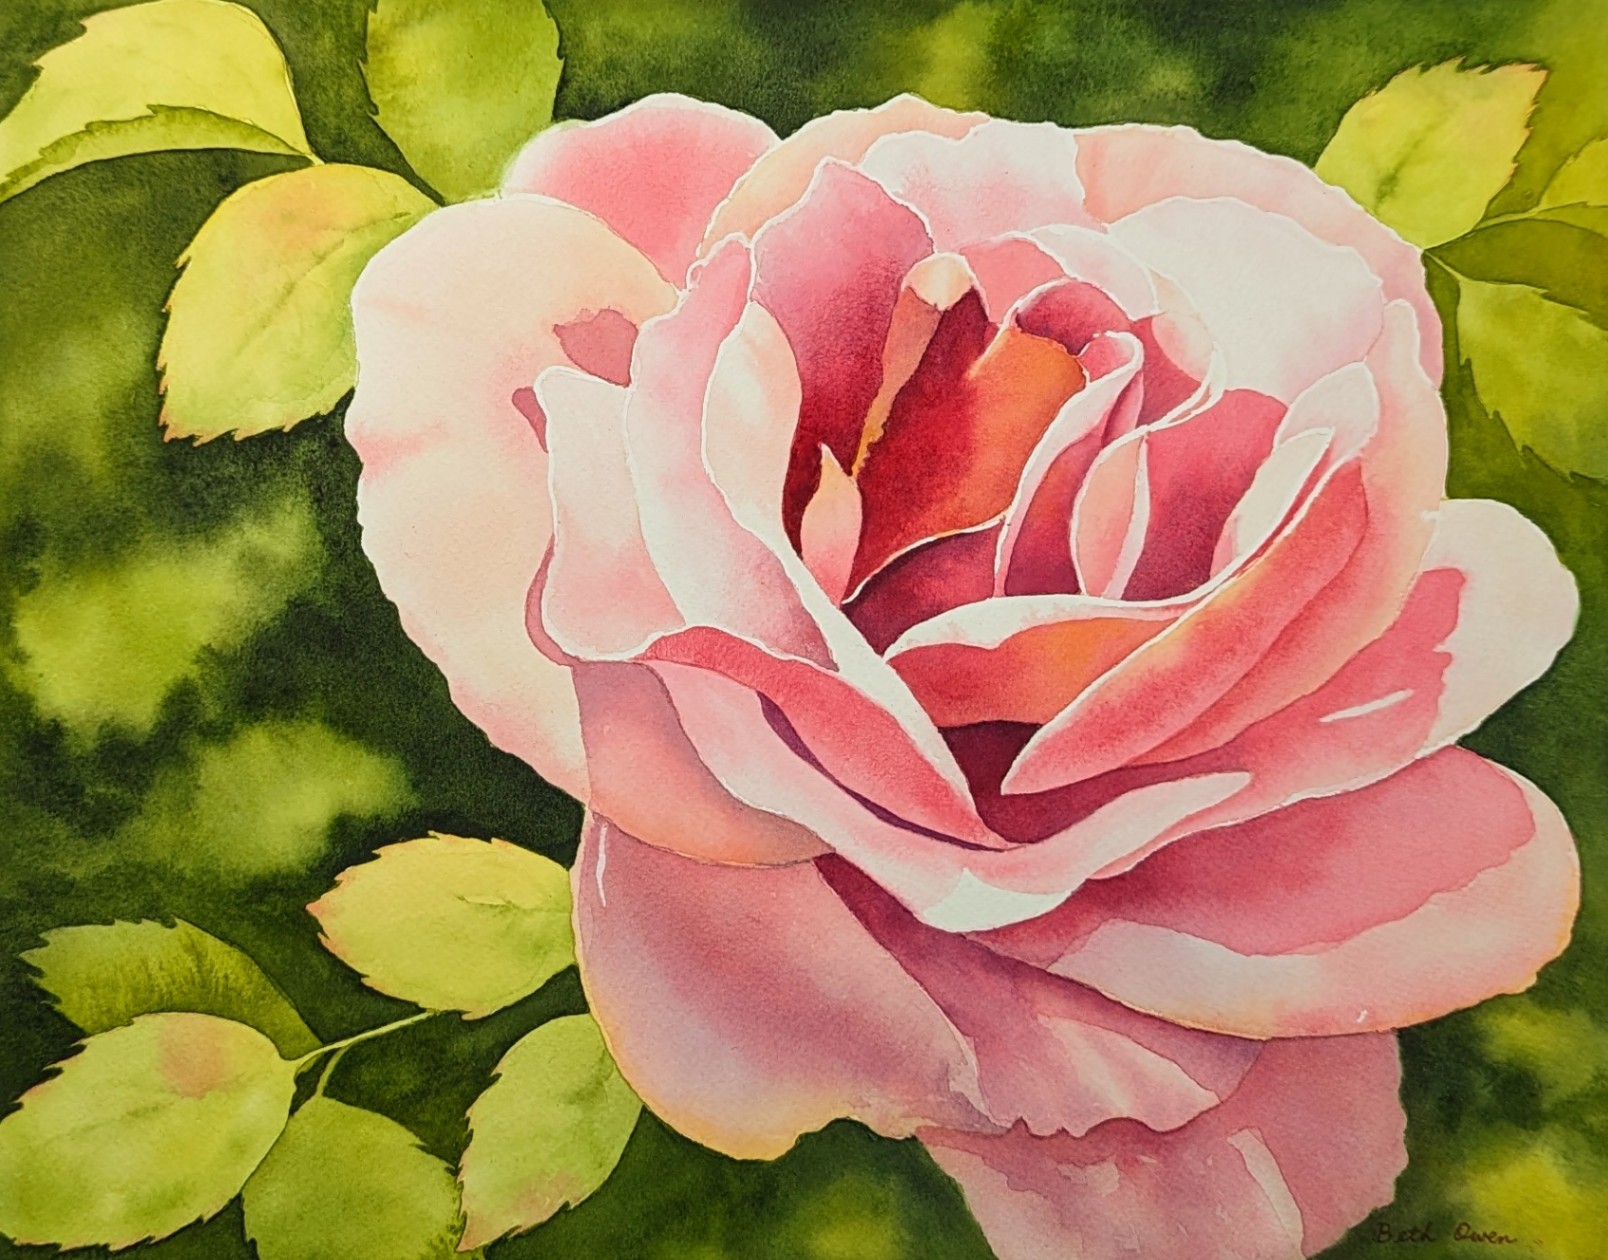 Watercolor Rose Study Painting